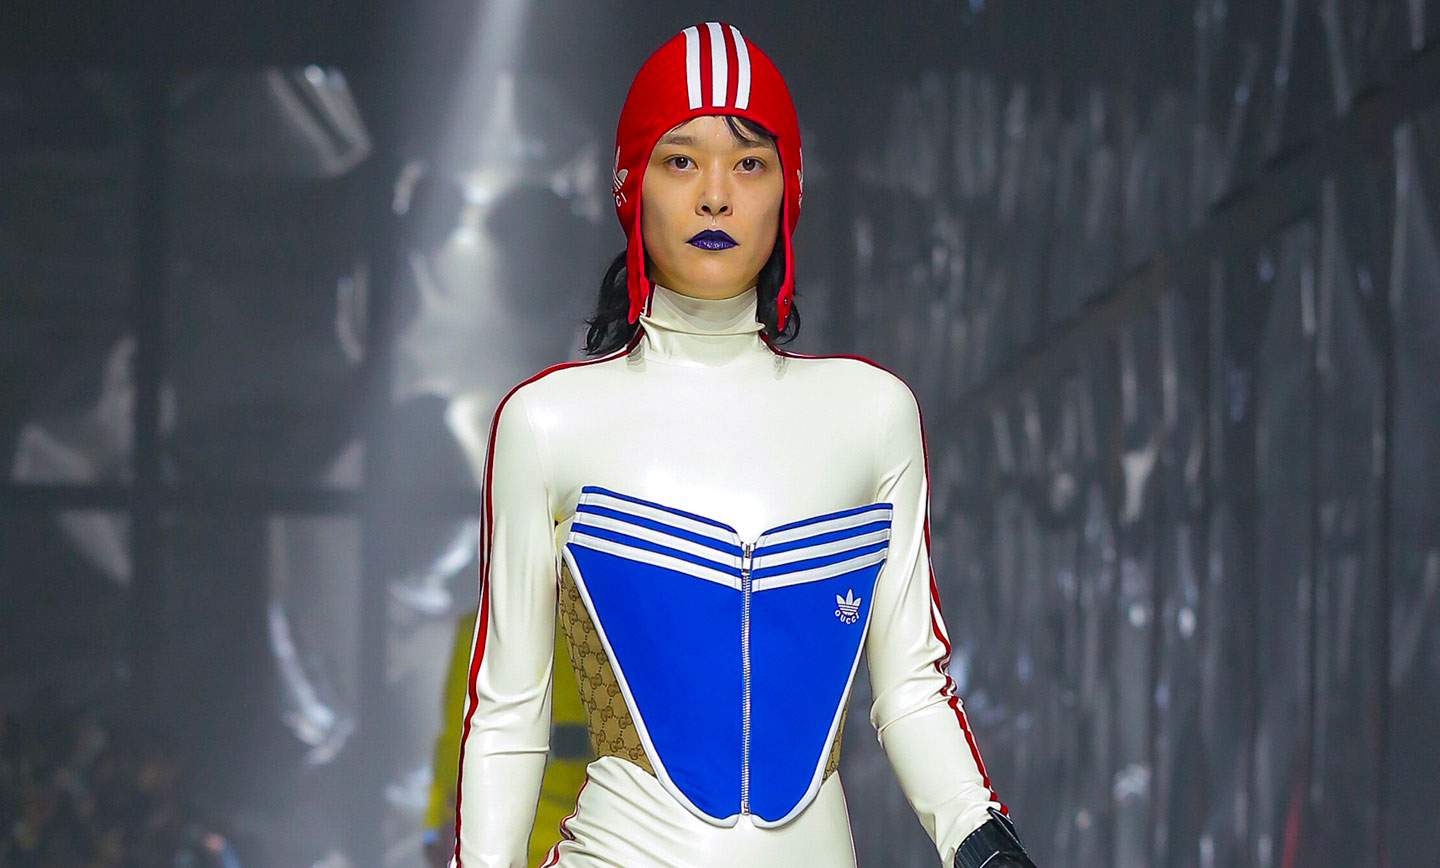 Gucci's Exquisite show included Adidas collab 